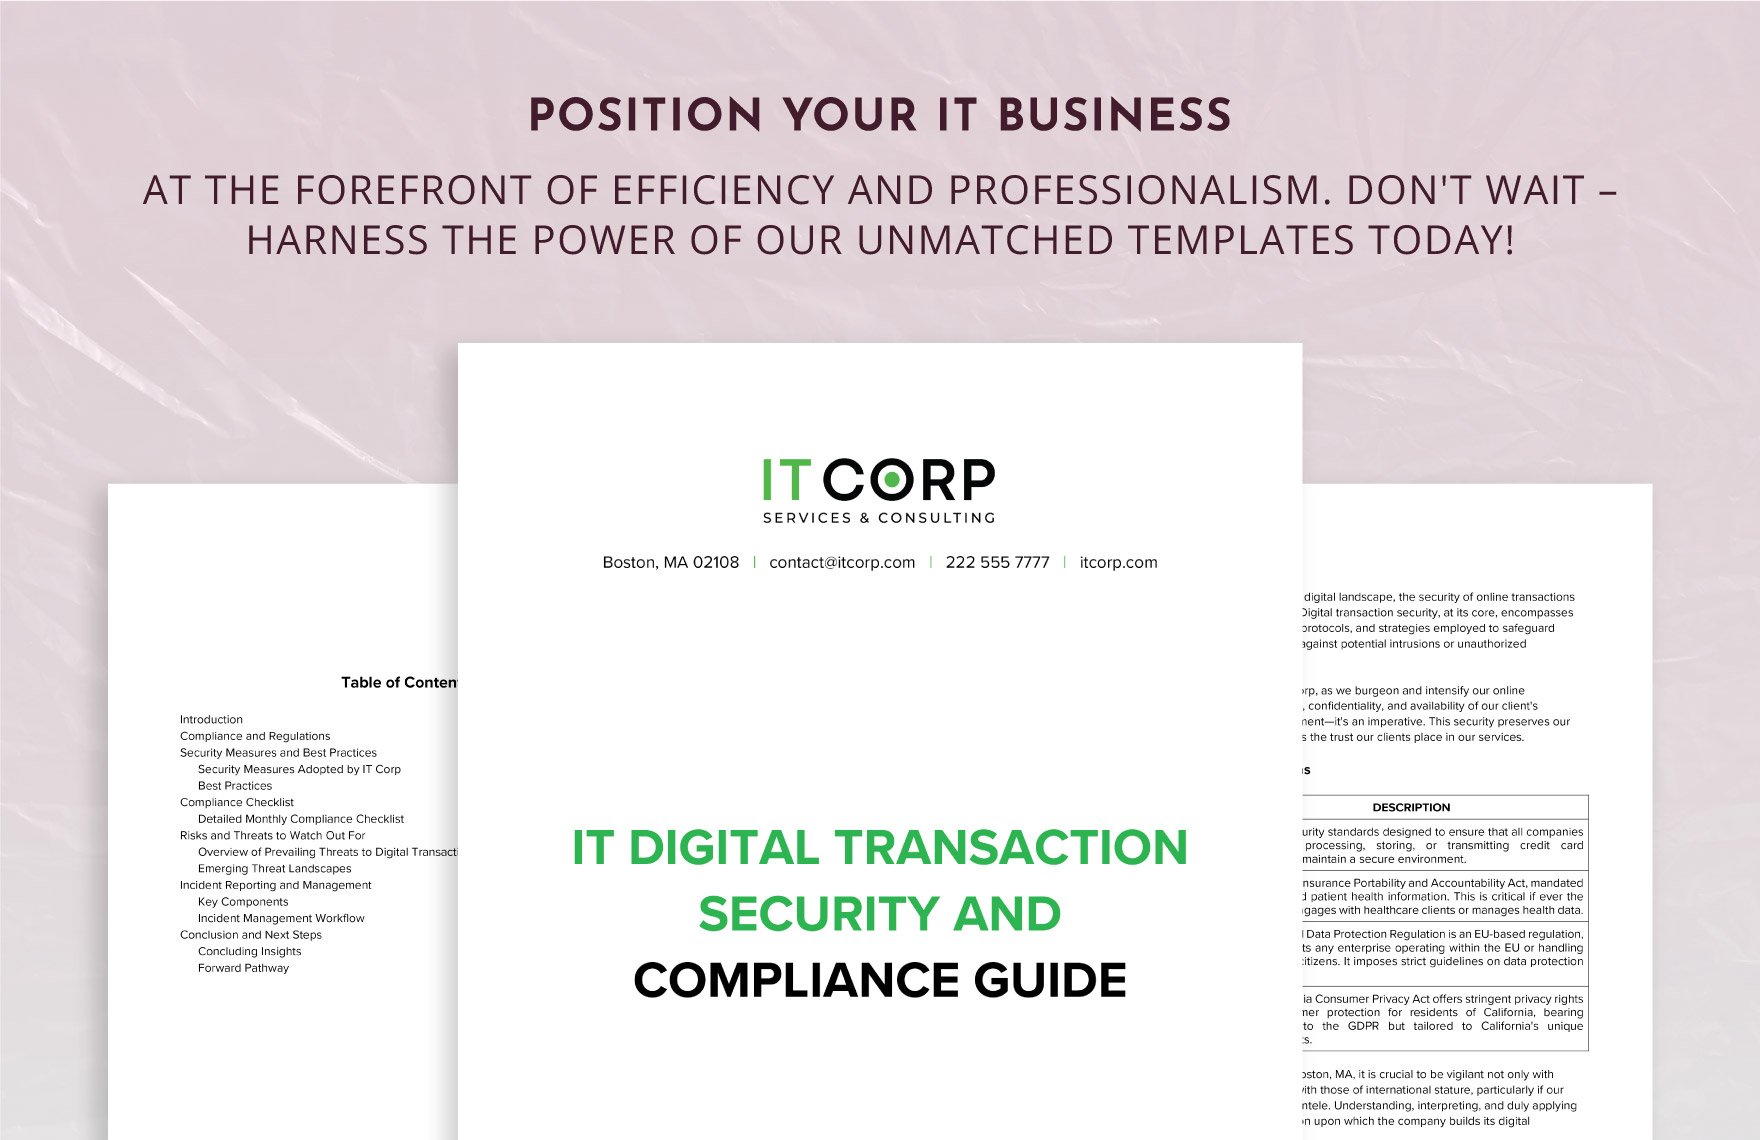 IT Digital Transaction Security and Compliance Guide Template